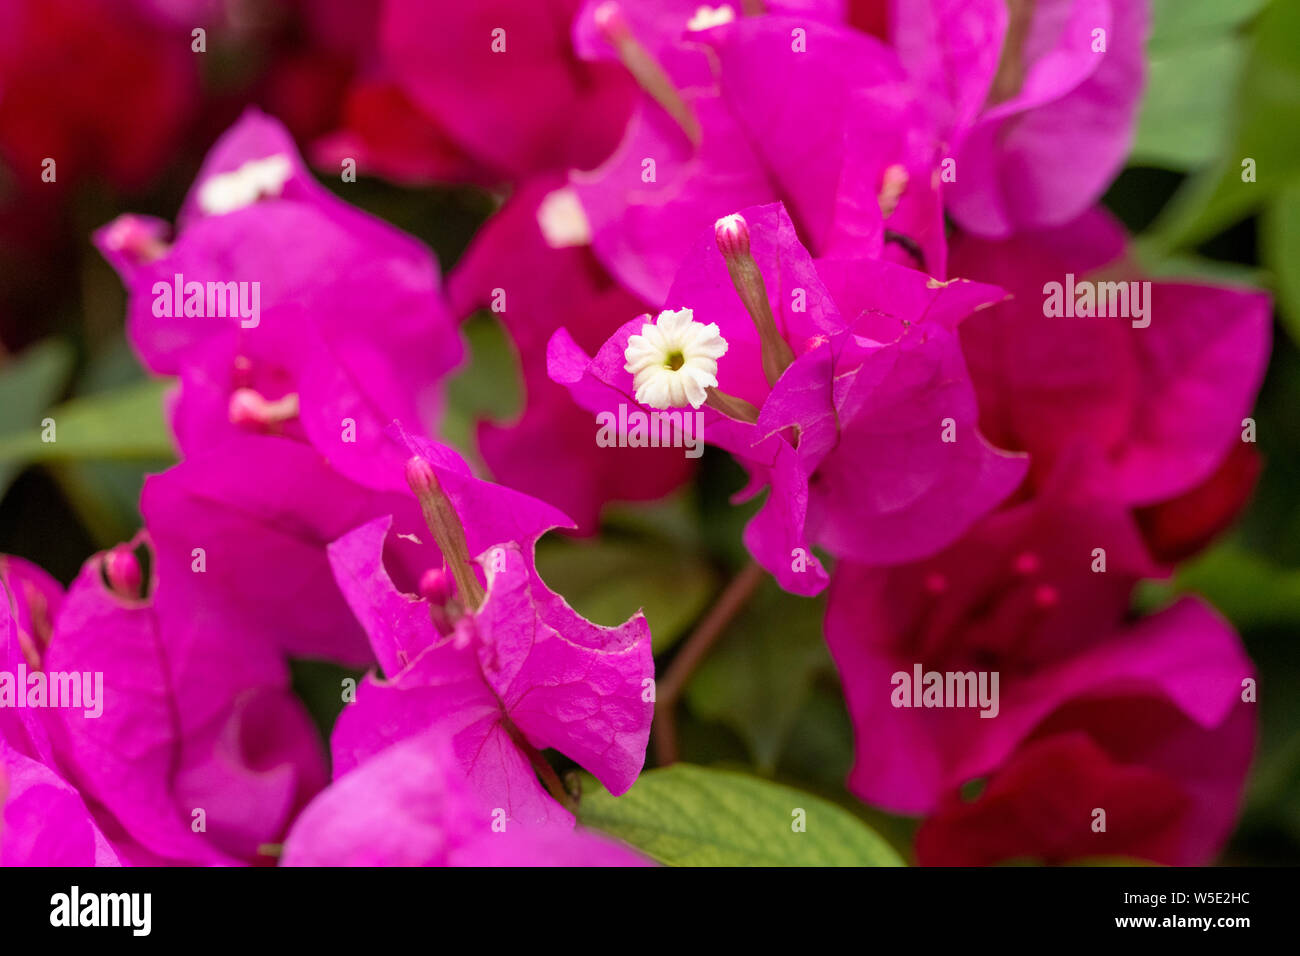 Bougainvillea flower puts its head out of a mass of pink bracts Stock Photo